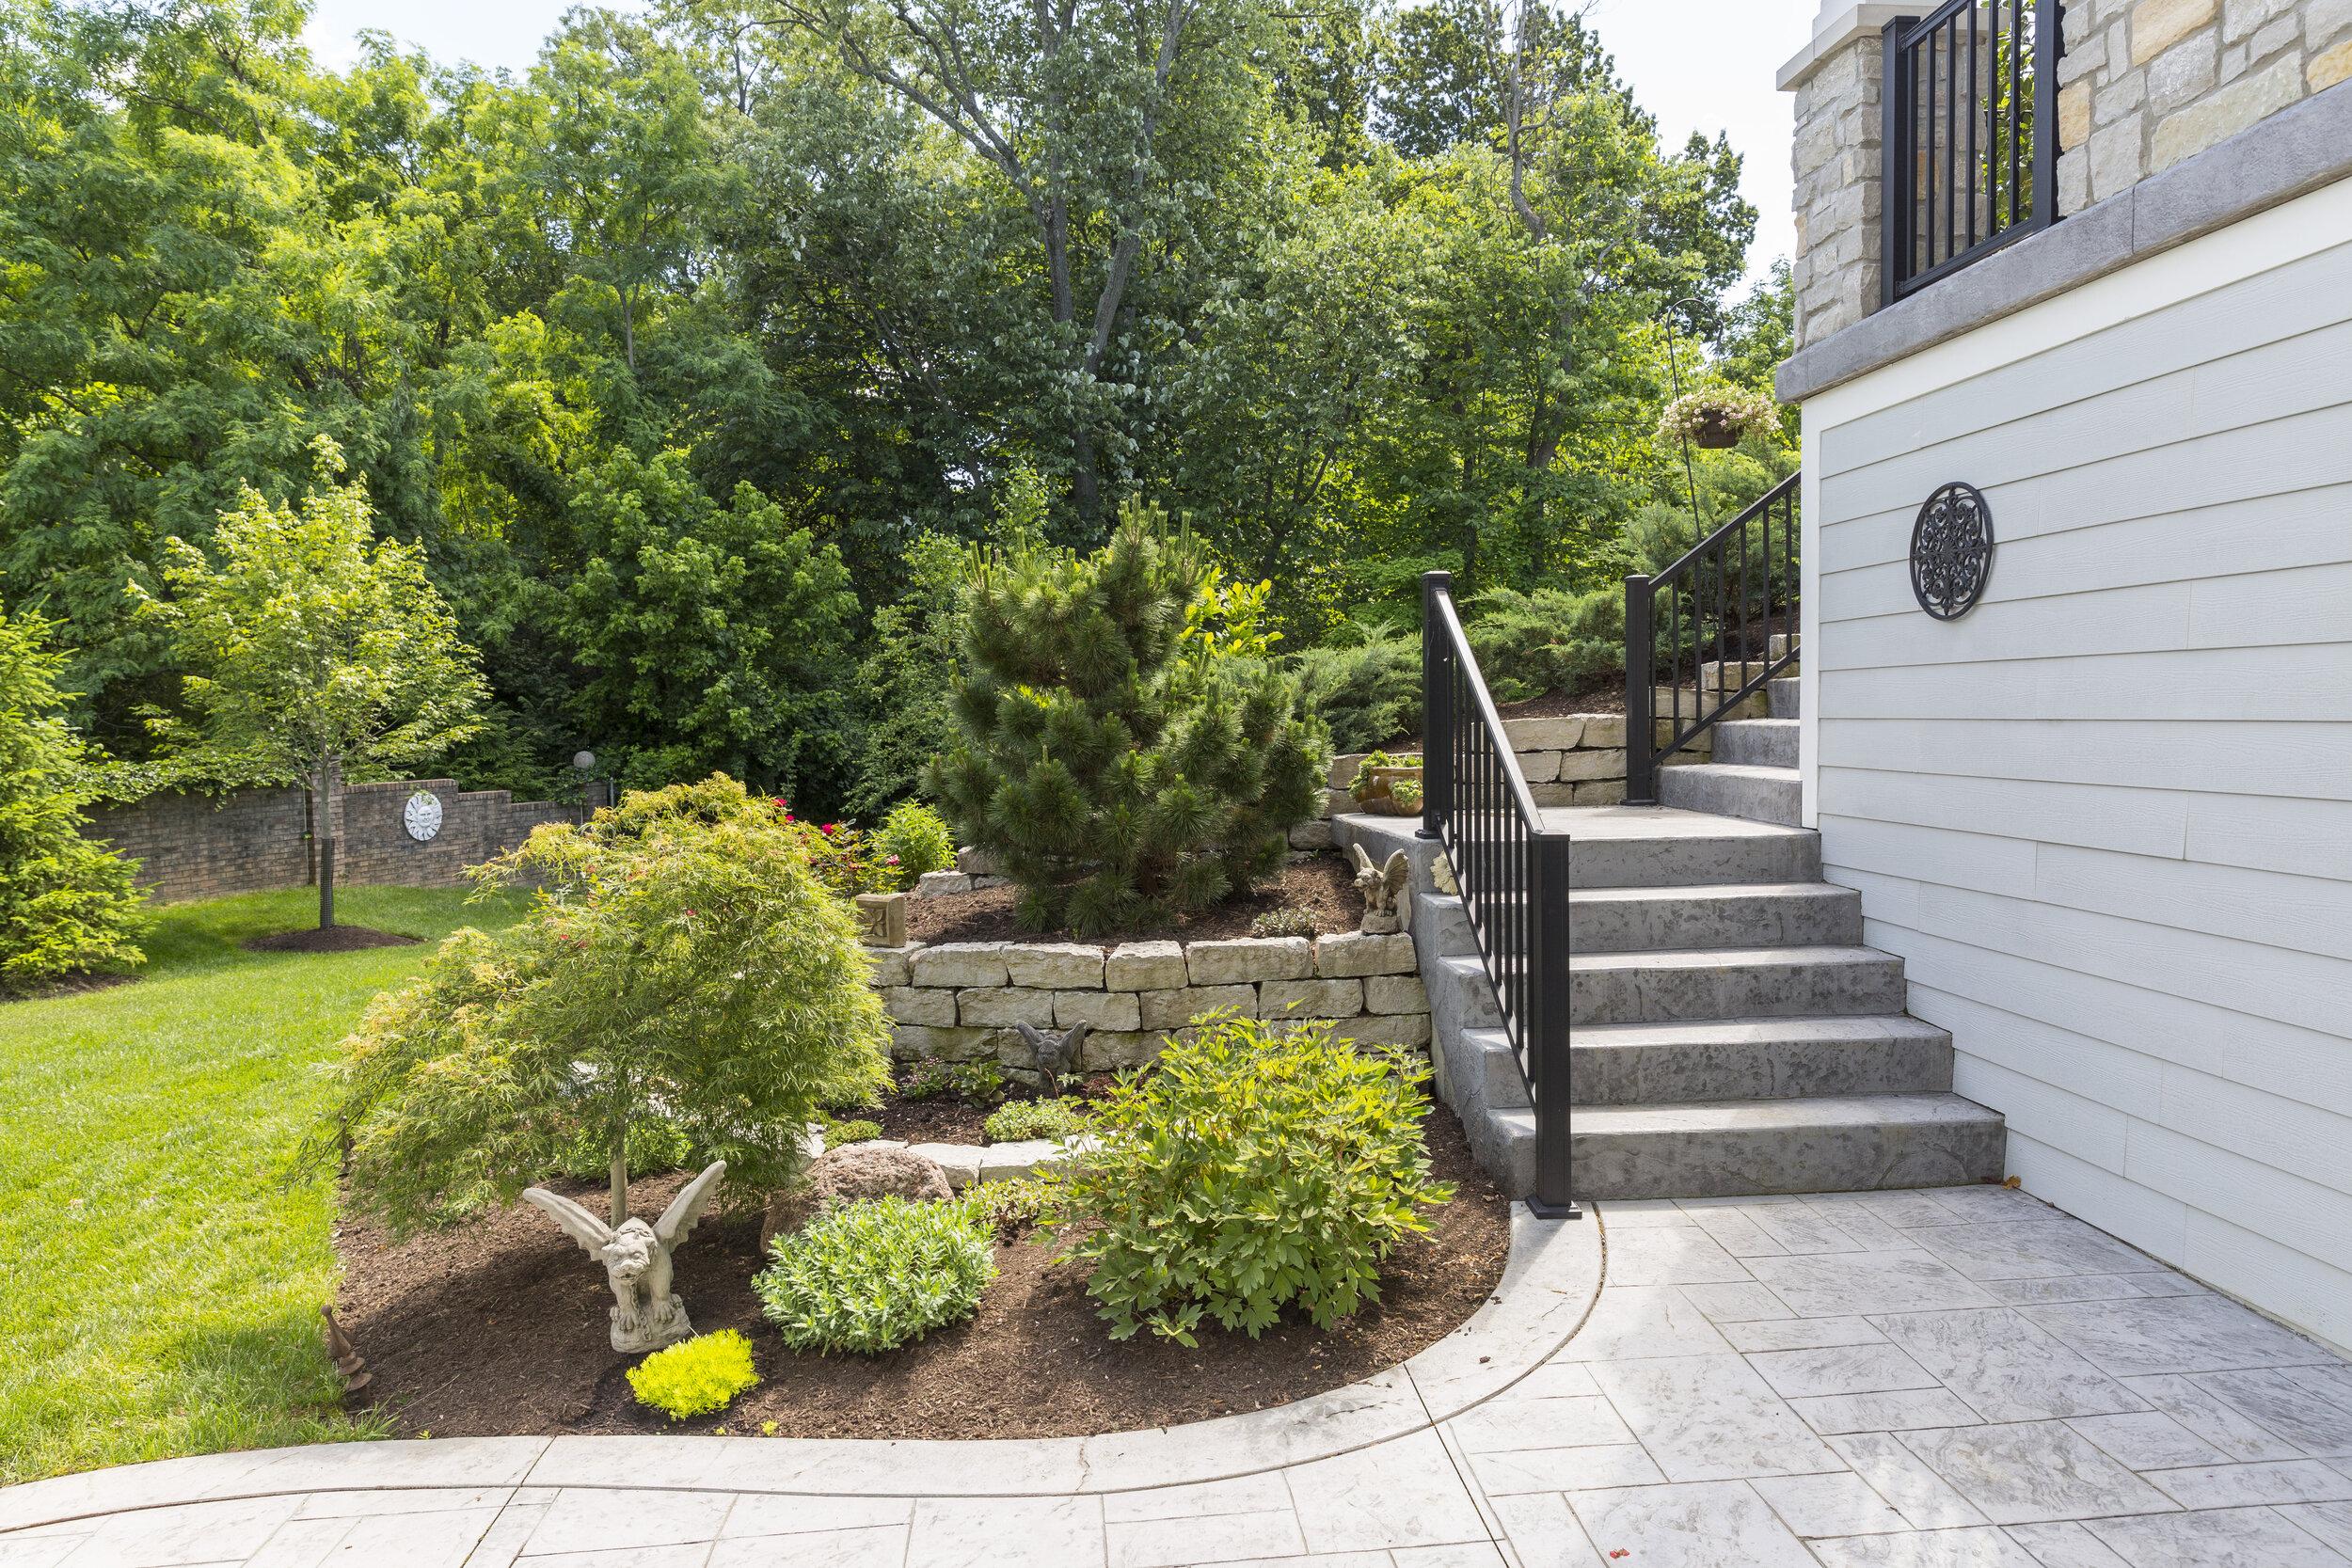 From vision to reality- How a landscape designer enhances hardscape projects?